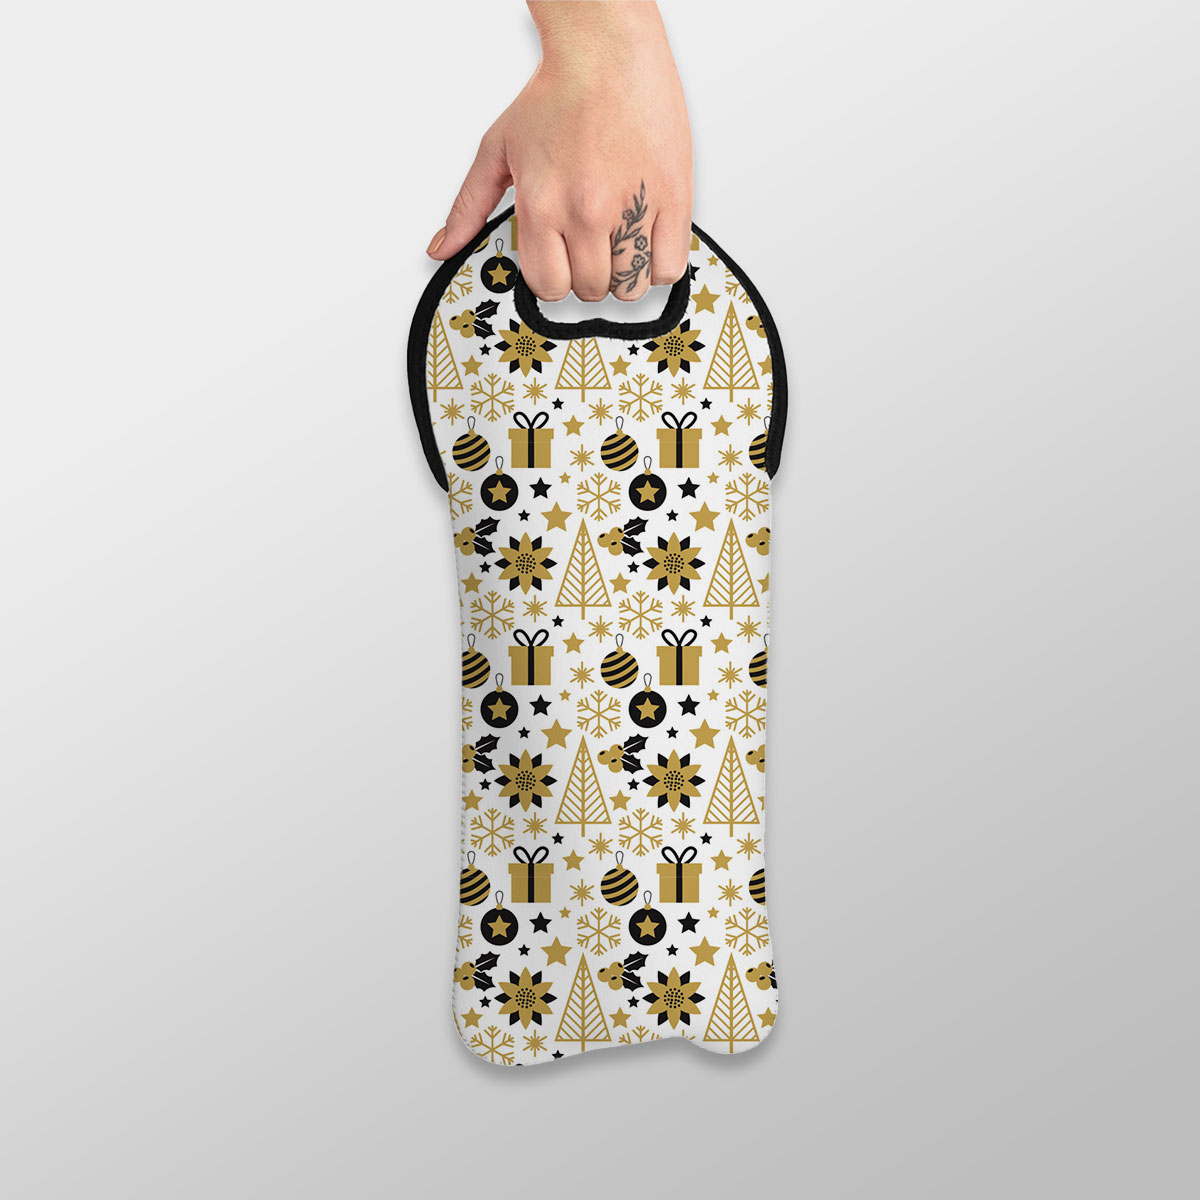 Black And Gold Christmas Gift, Holly Leaf, Snowflake On White Background Wine Tote Bag